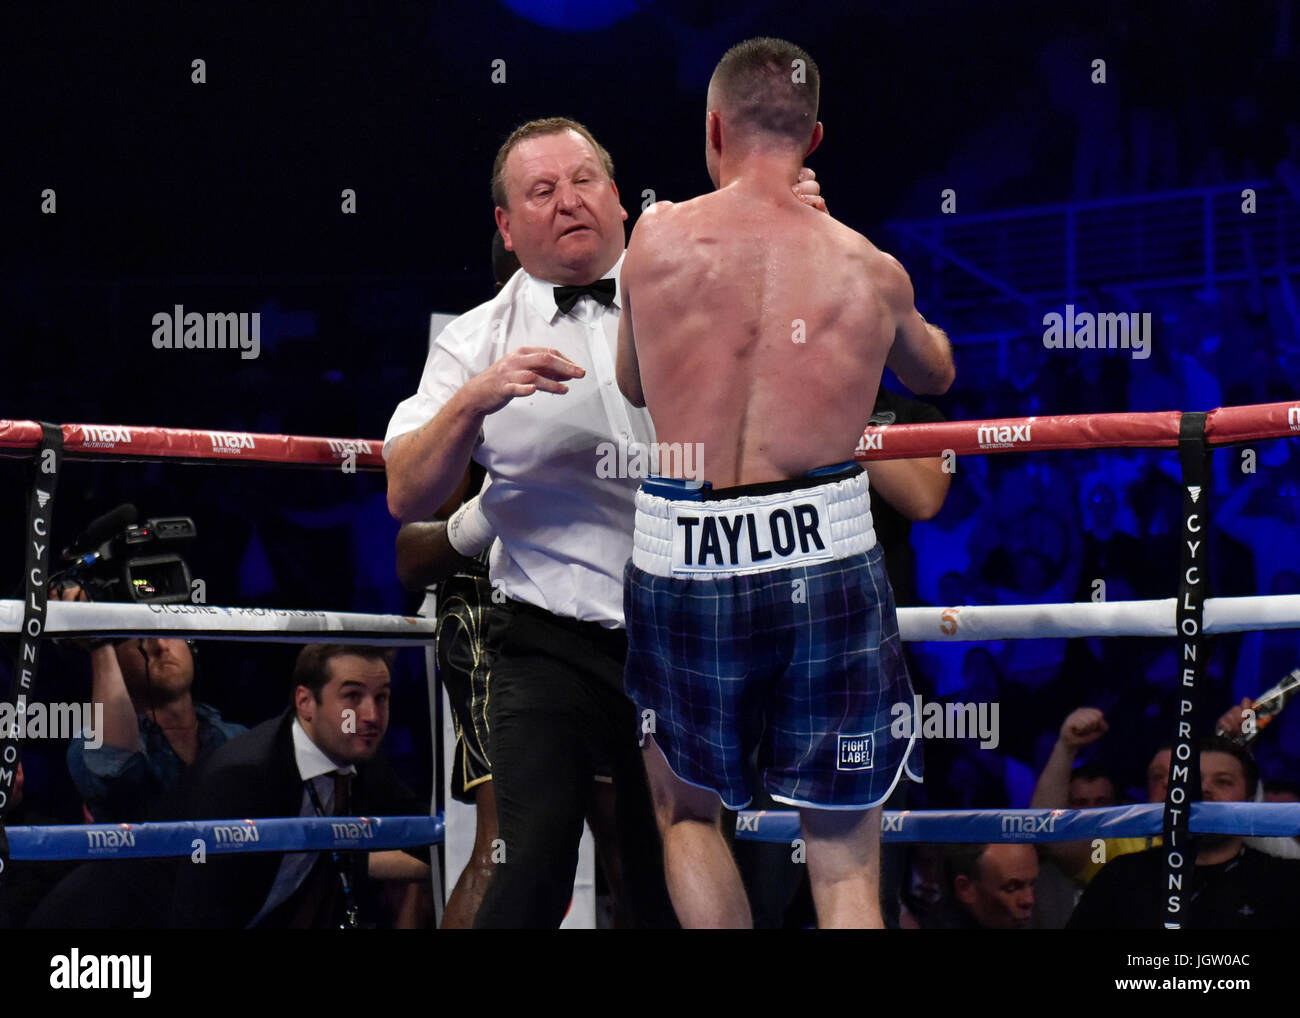 Saturday 8th of July 2017: Boxing, Braehead Arena, Glasgow, Scotland. Prestonpans boxer Josh Taylor defeats Hackney's Ohara Davies to add the WBC Silver belt to his Commonwealth title. The 26-year-old earned his tenth and most satisfying victory of his short career in an explosive night at Glasgow’s Braehead Arena, a win that propels the Prestonpans puncher into the top 15 in the world super lightweight rankings. Stock Photo